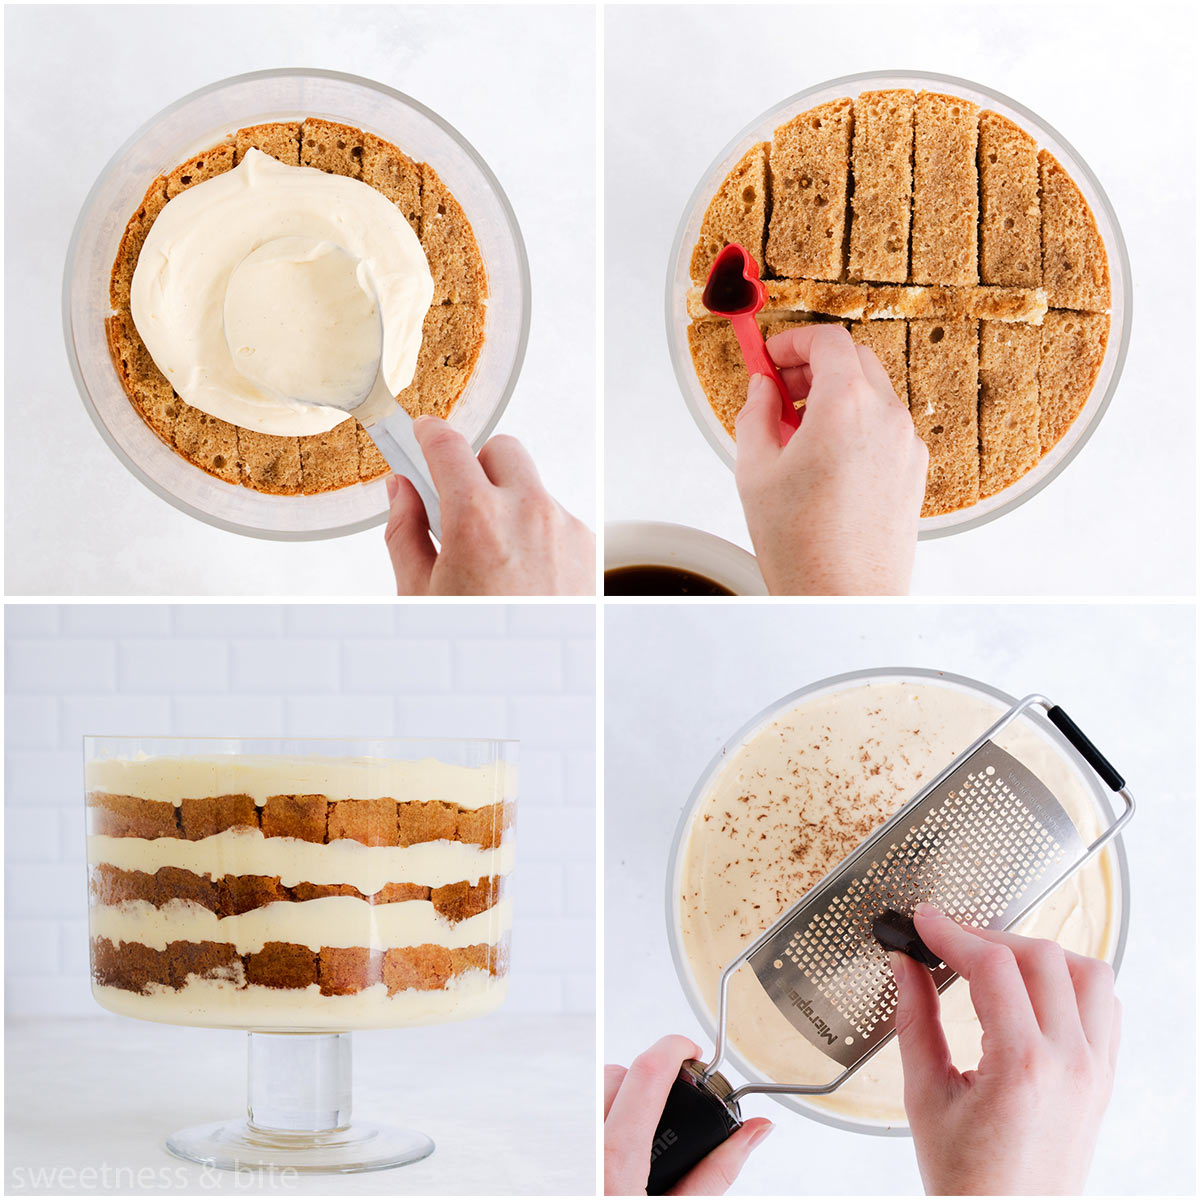 Collage of four images showing the layered tiramisu, and chocolate being grated on the top.